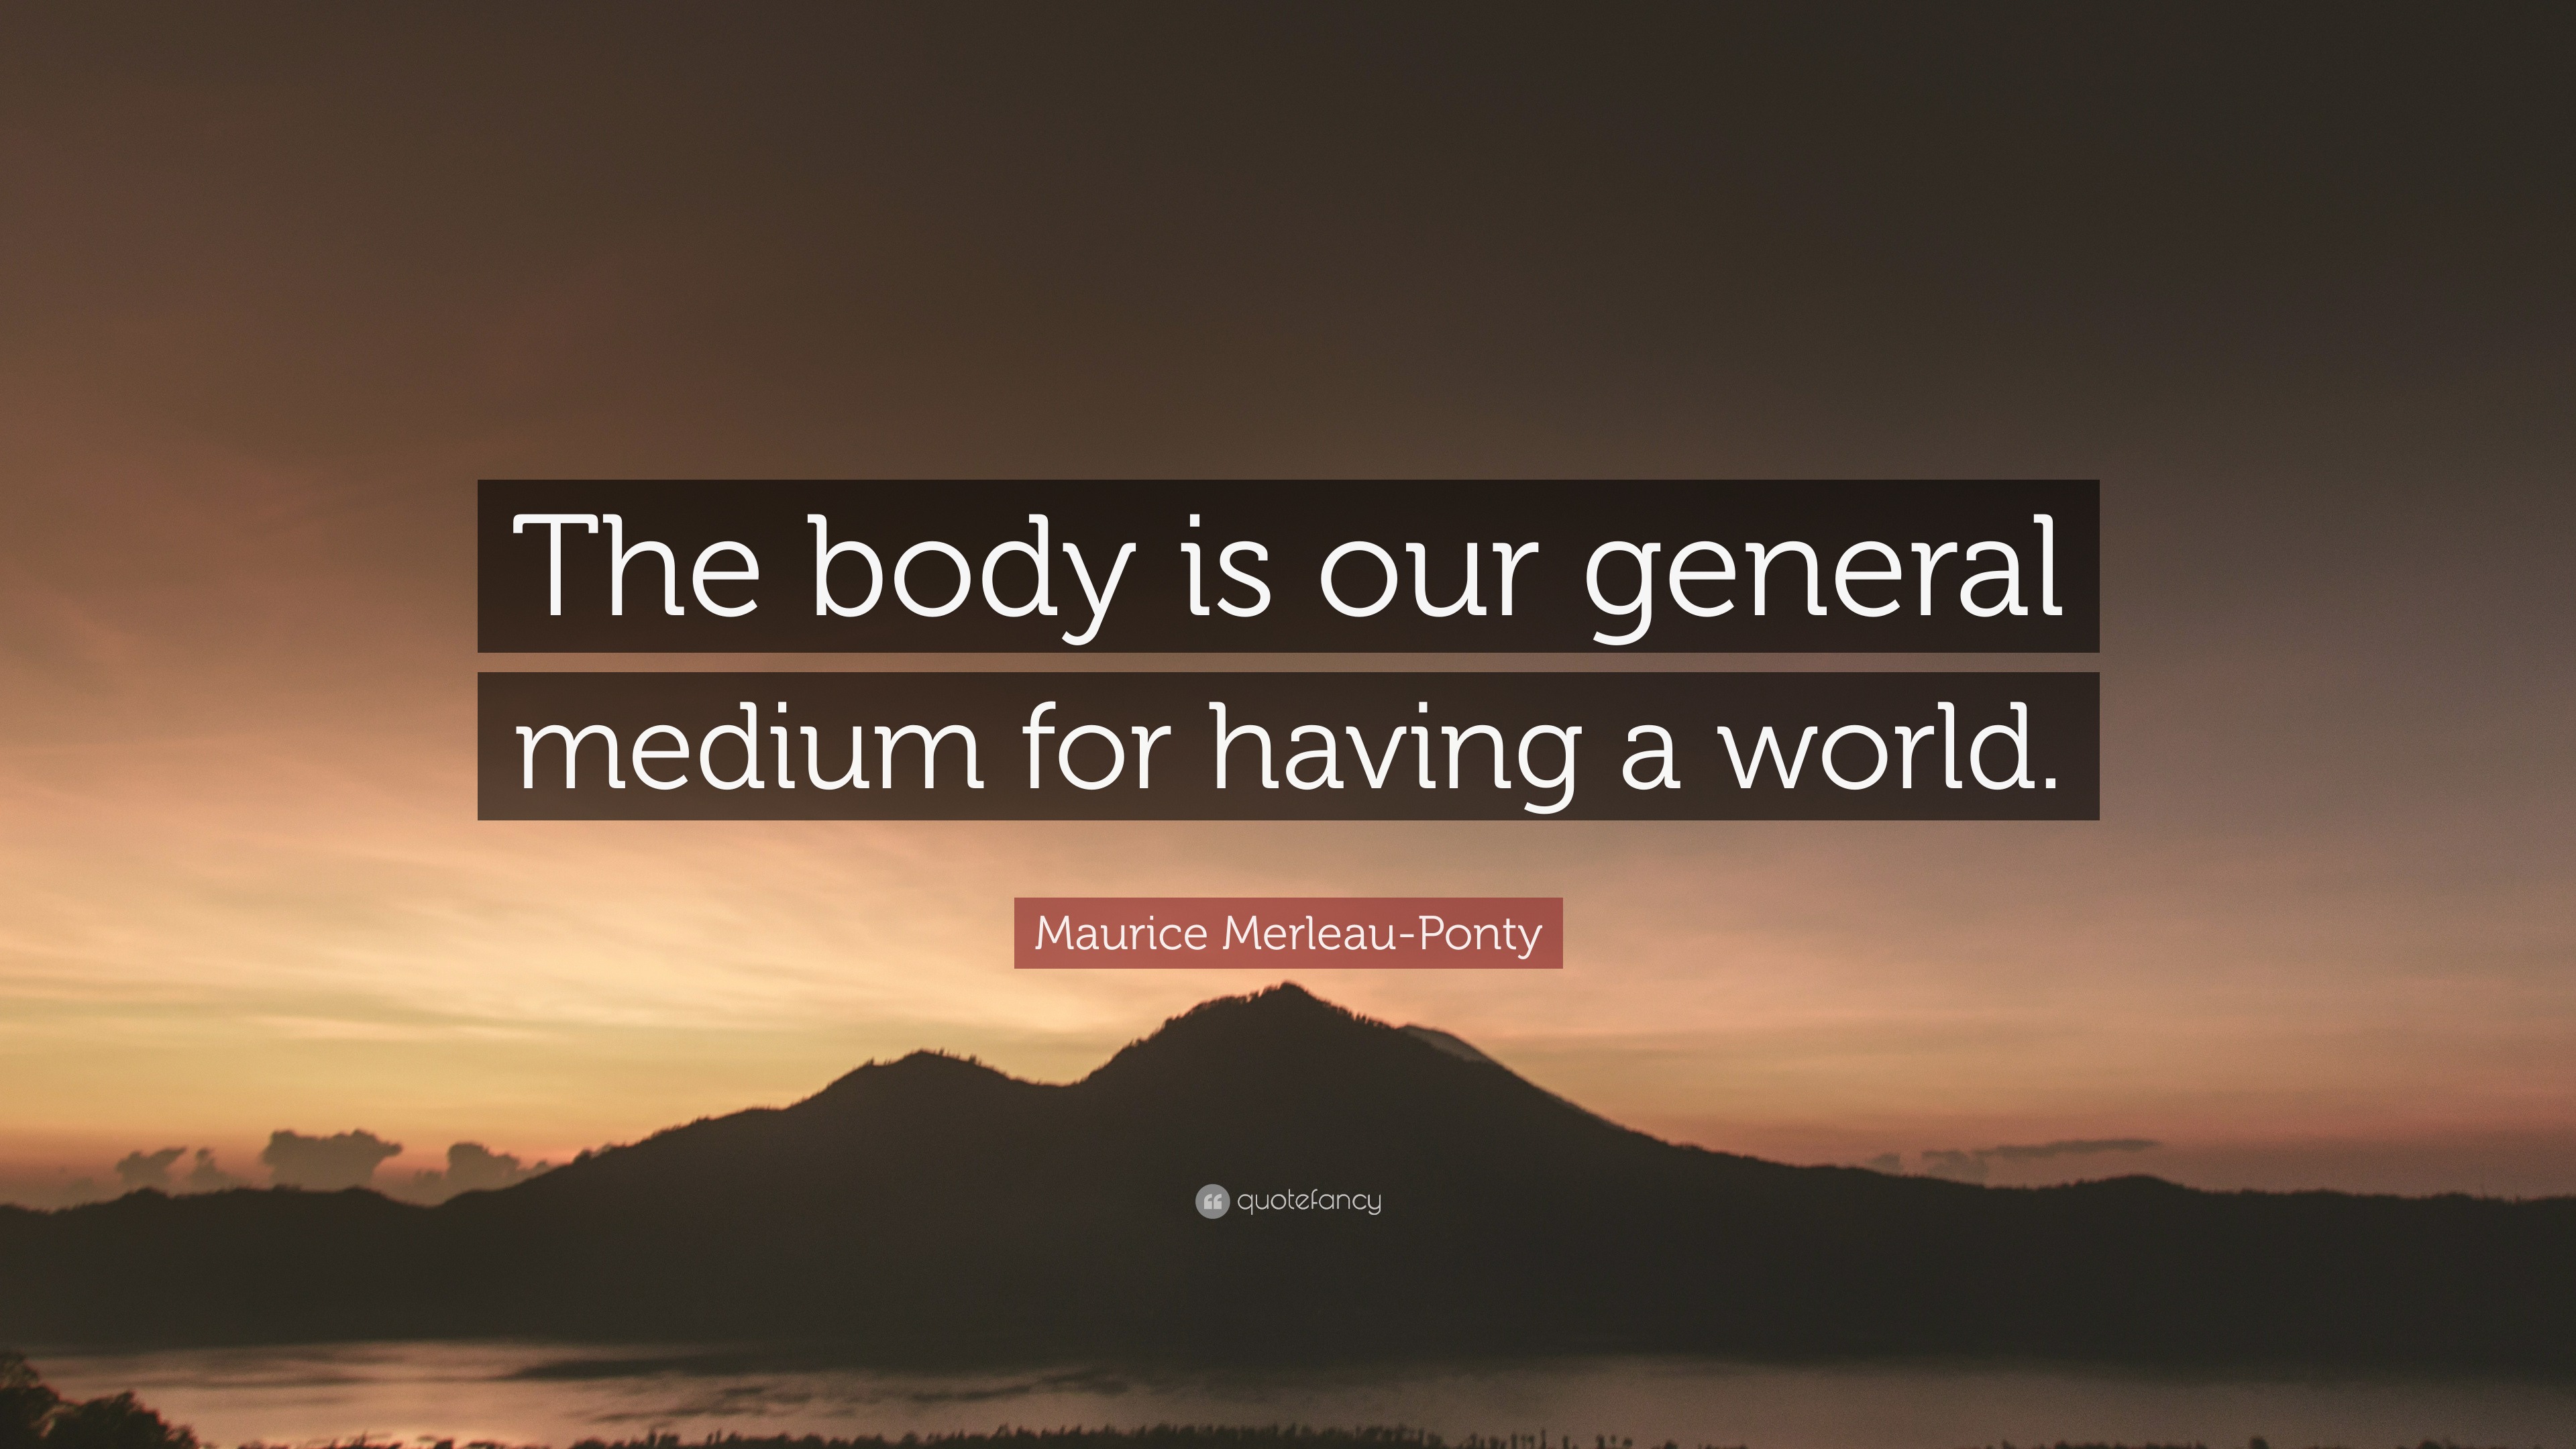 Maurice Merleau-Ponty Quotes (32 wallpapers) - Quotefancy